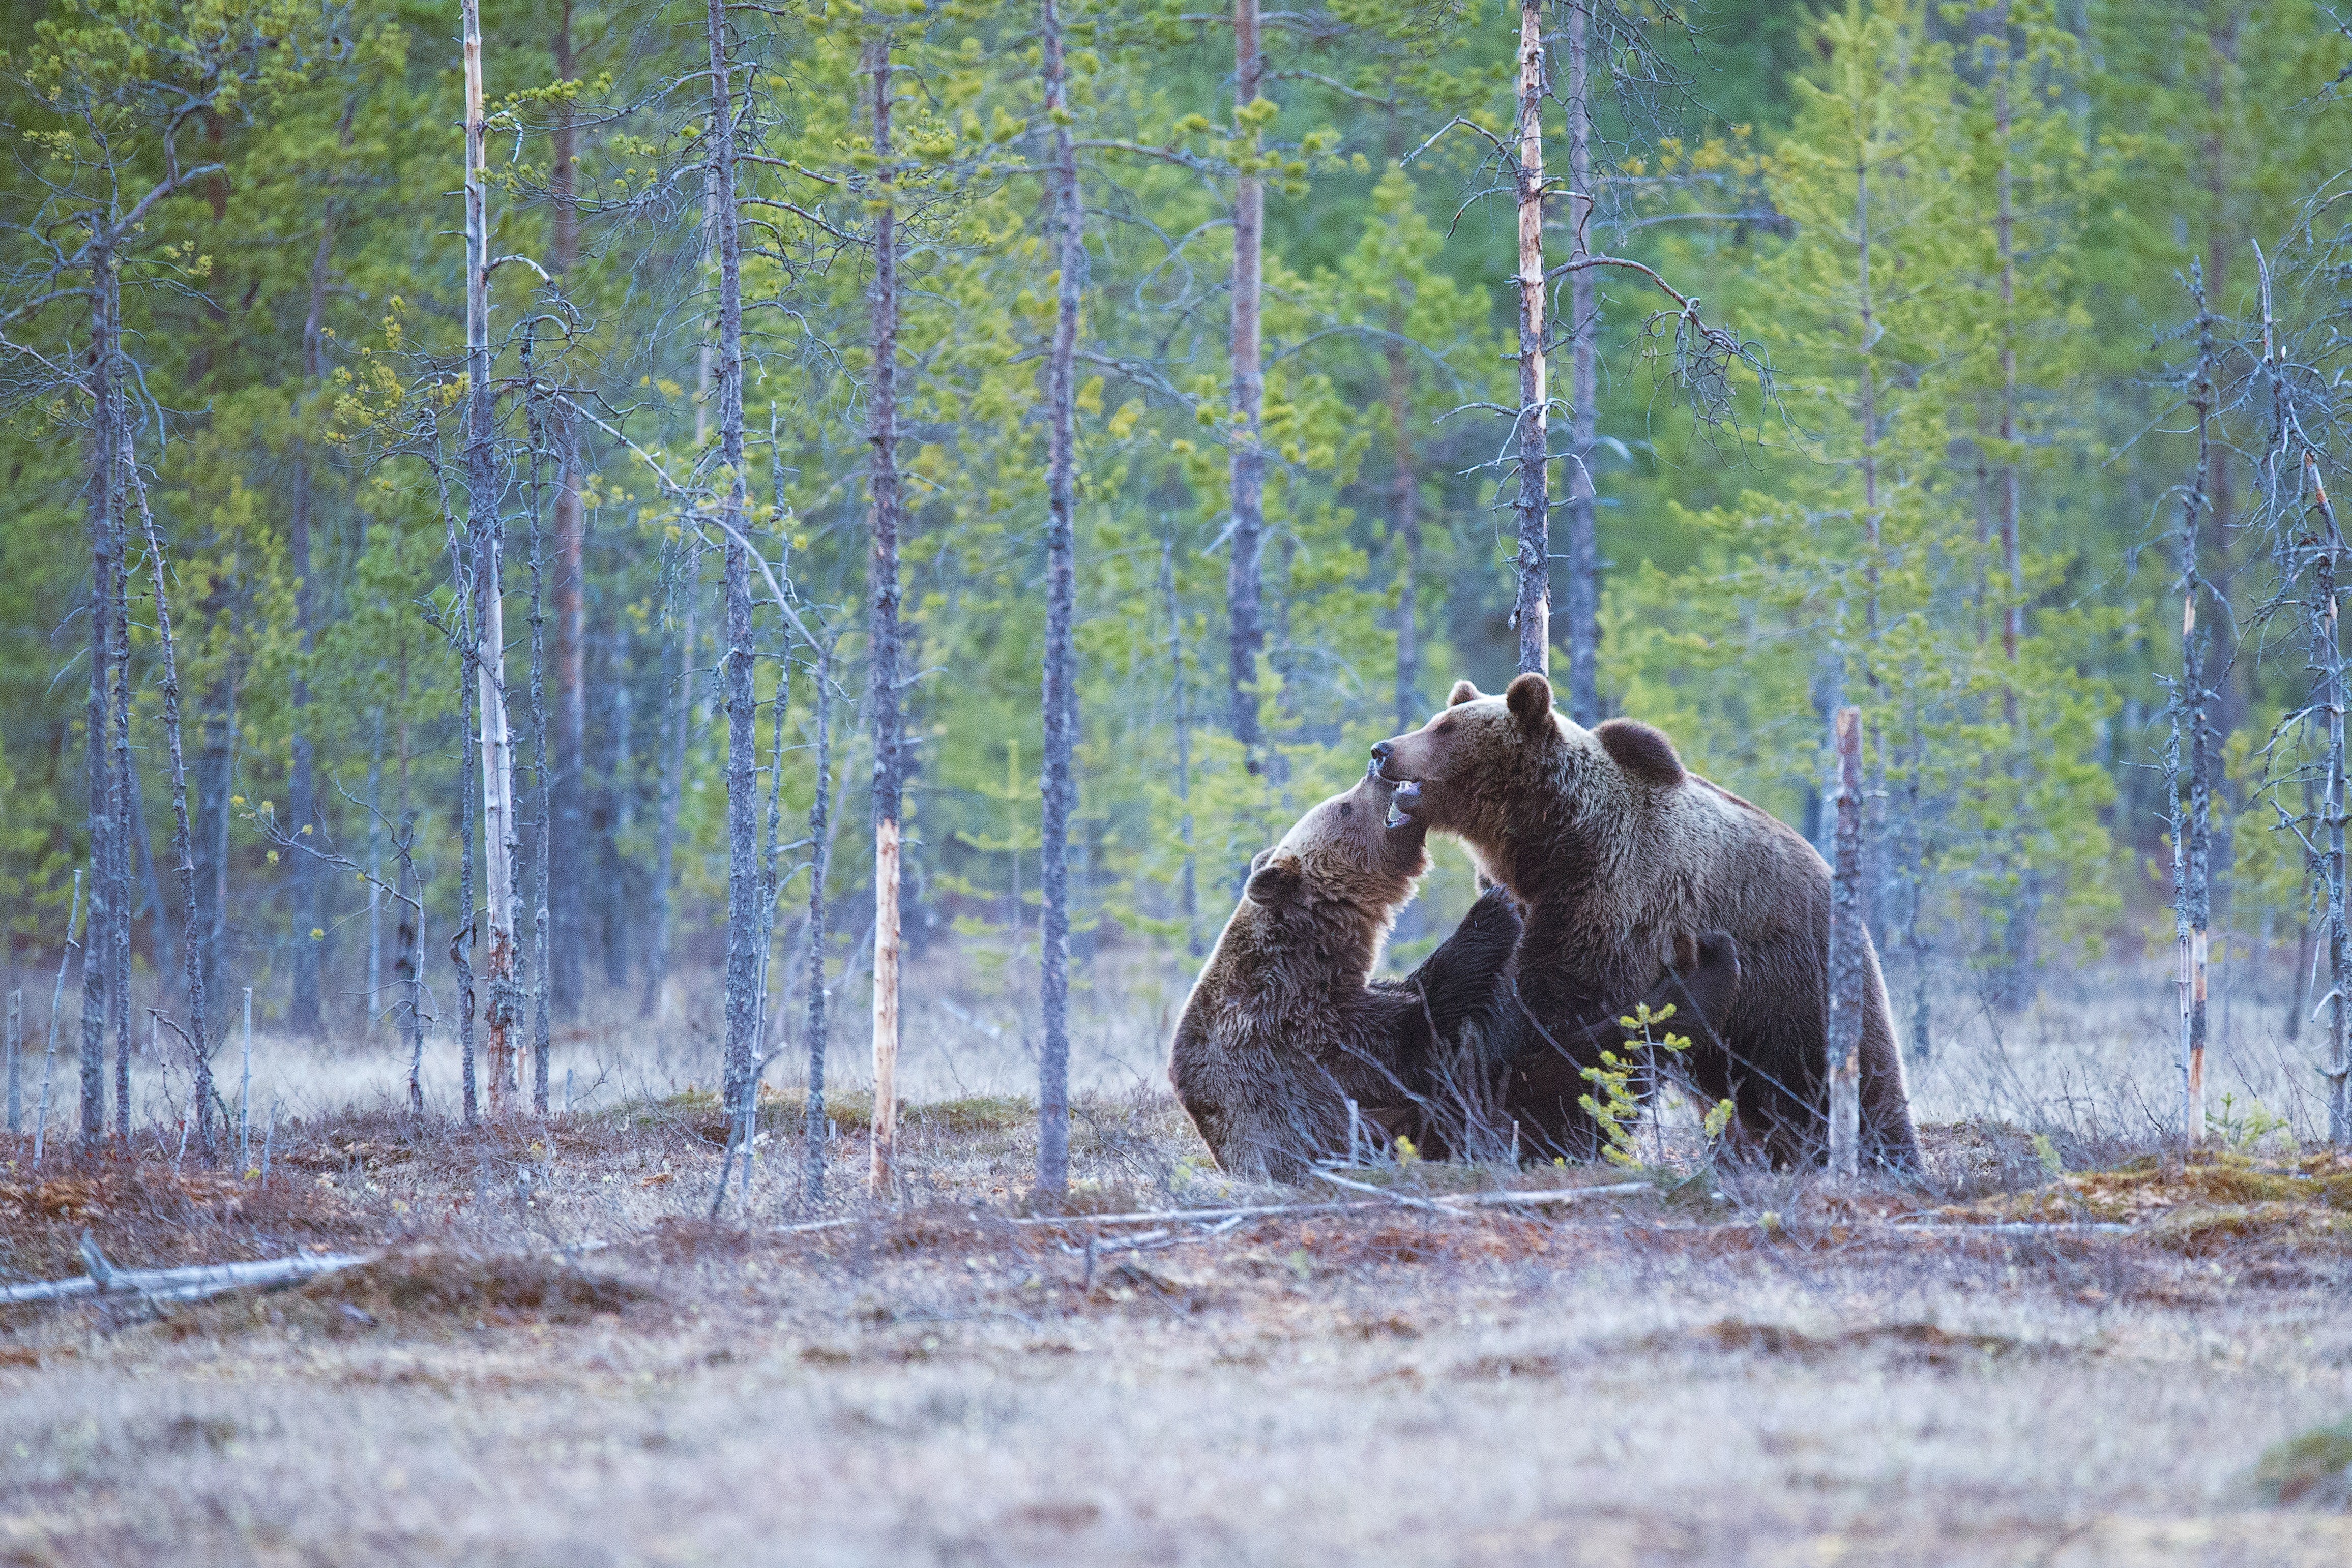 Two grizzly bears tussle in the wilderness, the one to the left is clearly winning but the one on the right still has a fighting chance. 